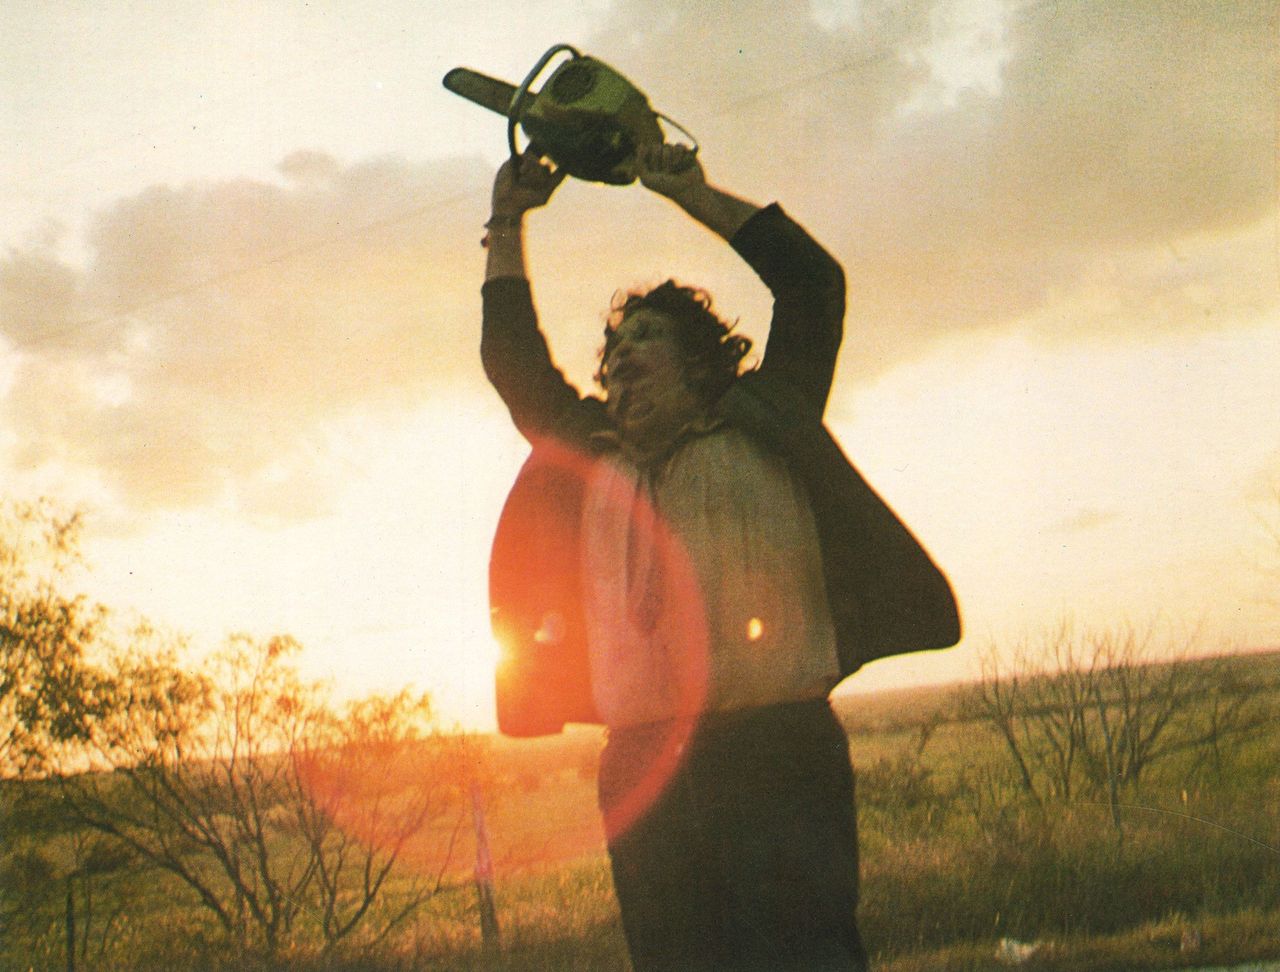 The Texas Chainsaw Massacre – Gein was also a big point of inspiration for the Psycho of the 70s.